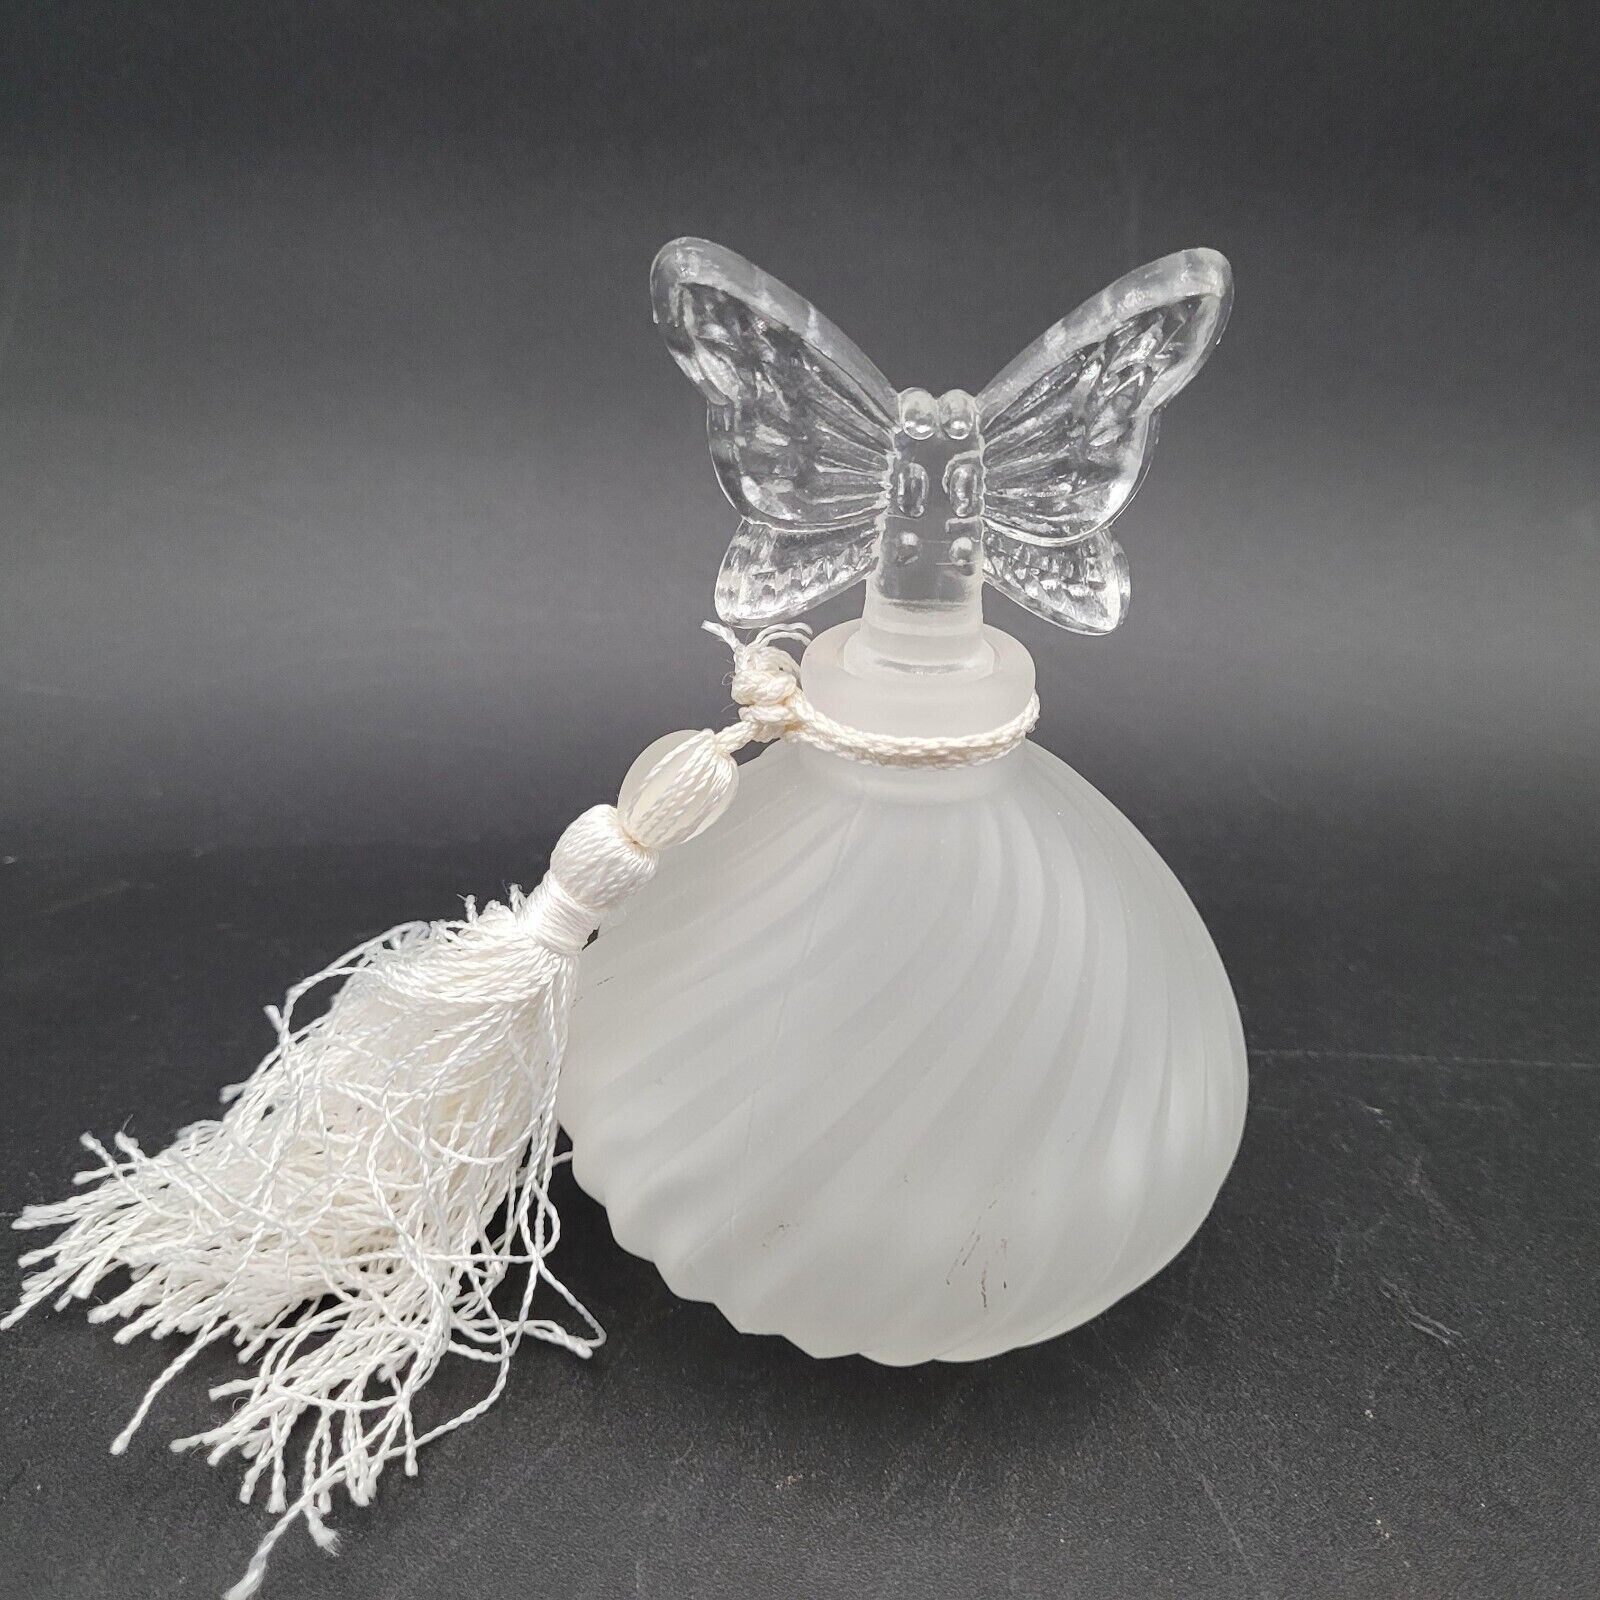 Primary image for Vintage Silvestri Swirl Frosted Glass Perfume Bottle Butterfly Topper w/Tassel